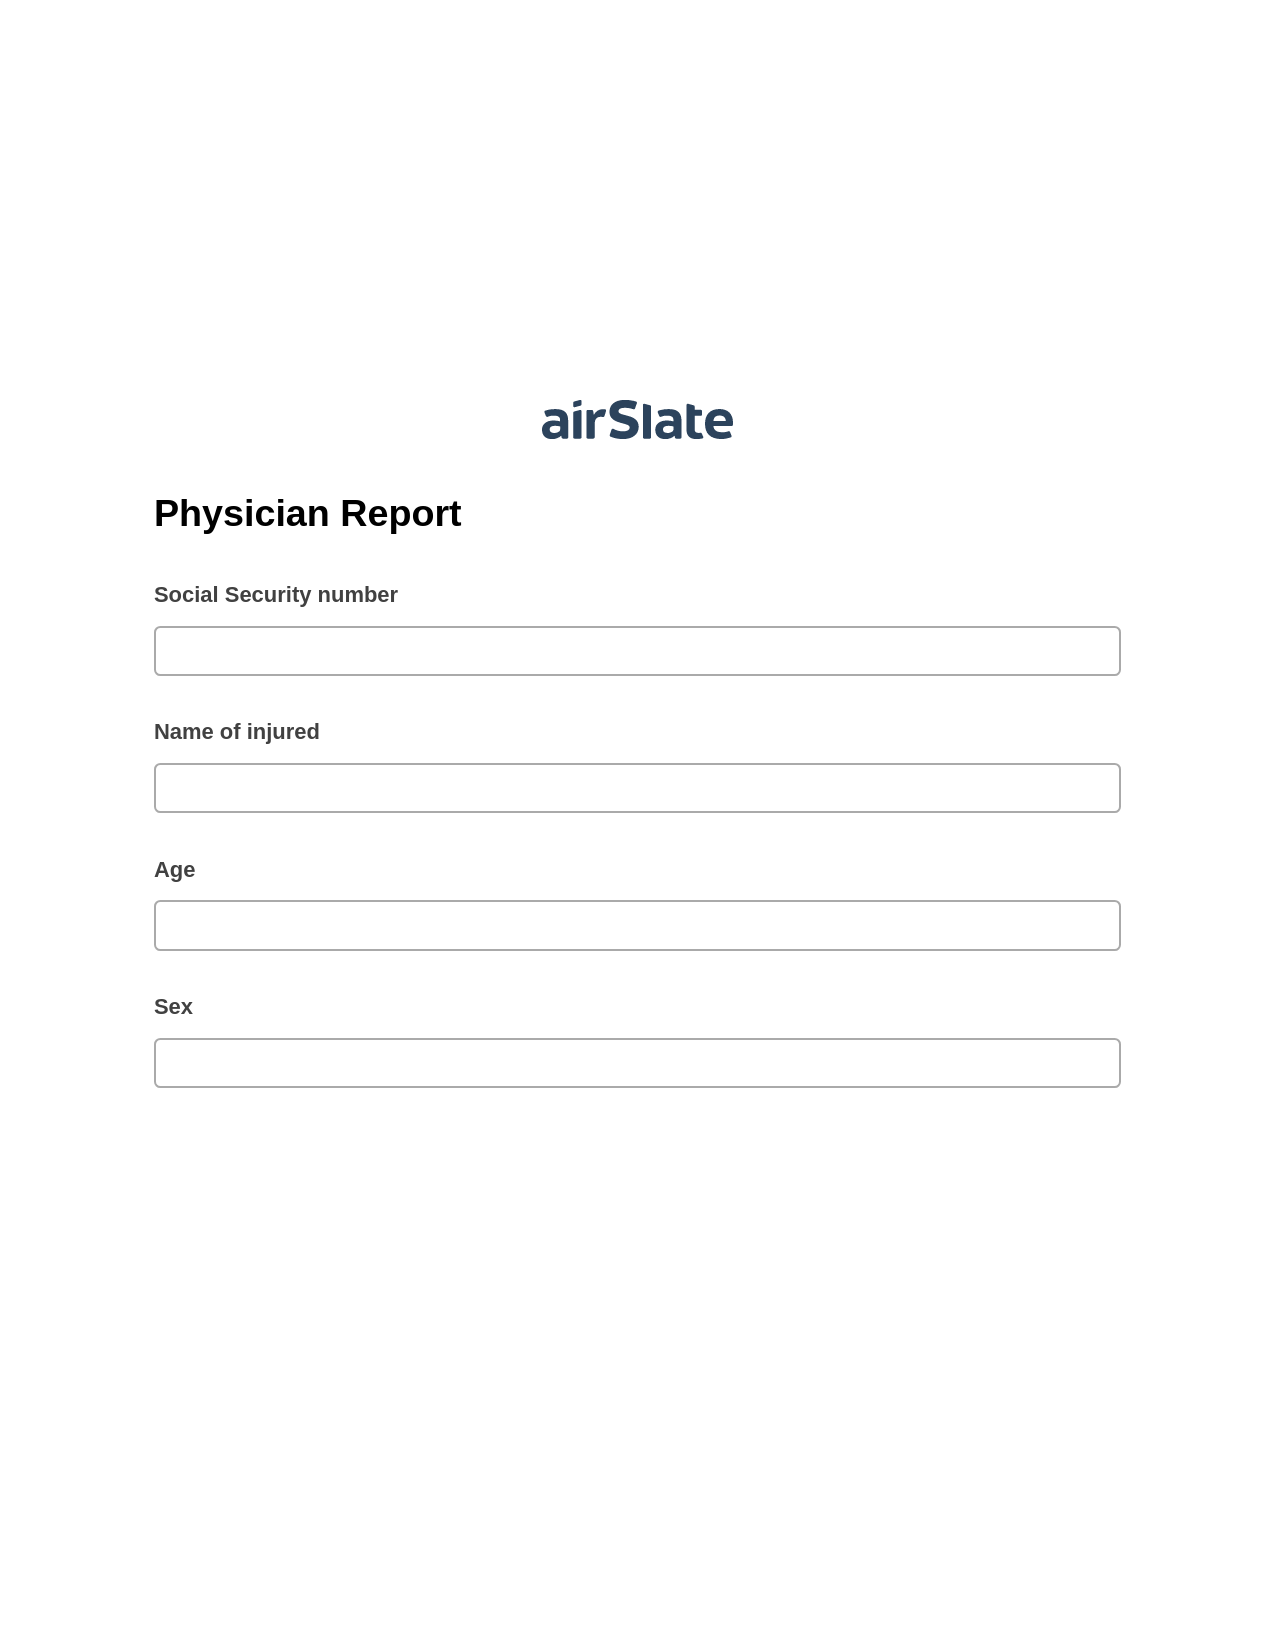 Physician Report Pre-fill from MS Dynamics 365 Records, Create slate from another Flow Bot, Export to Excel 365 Bot